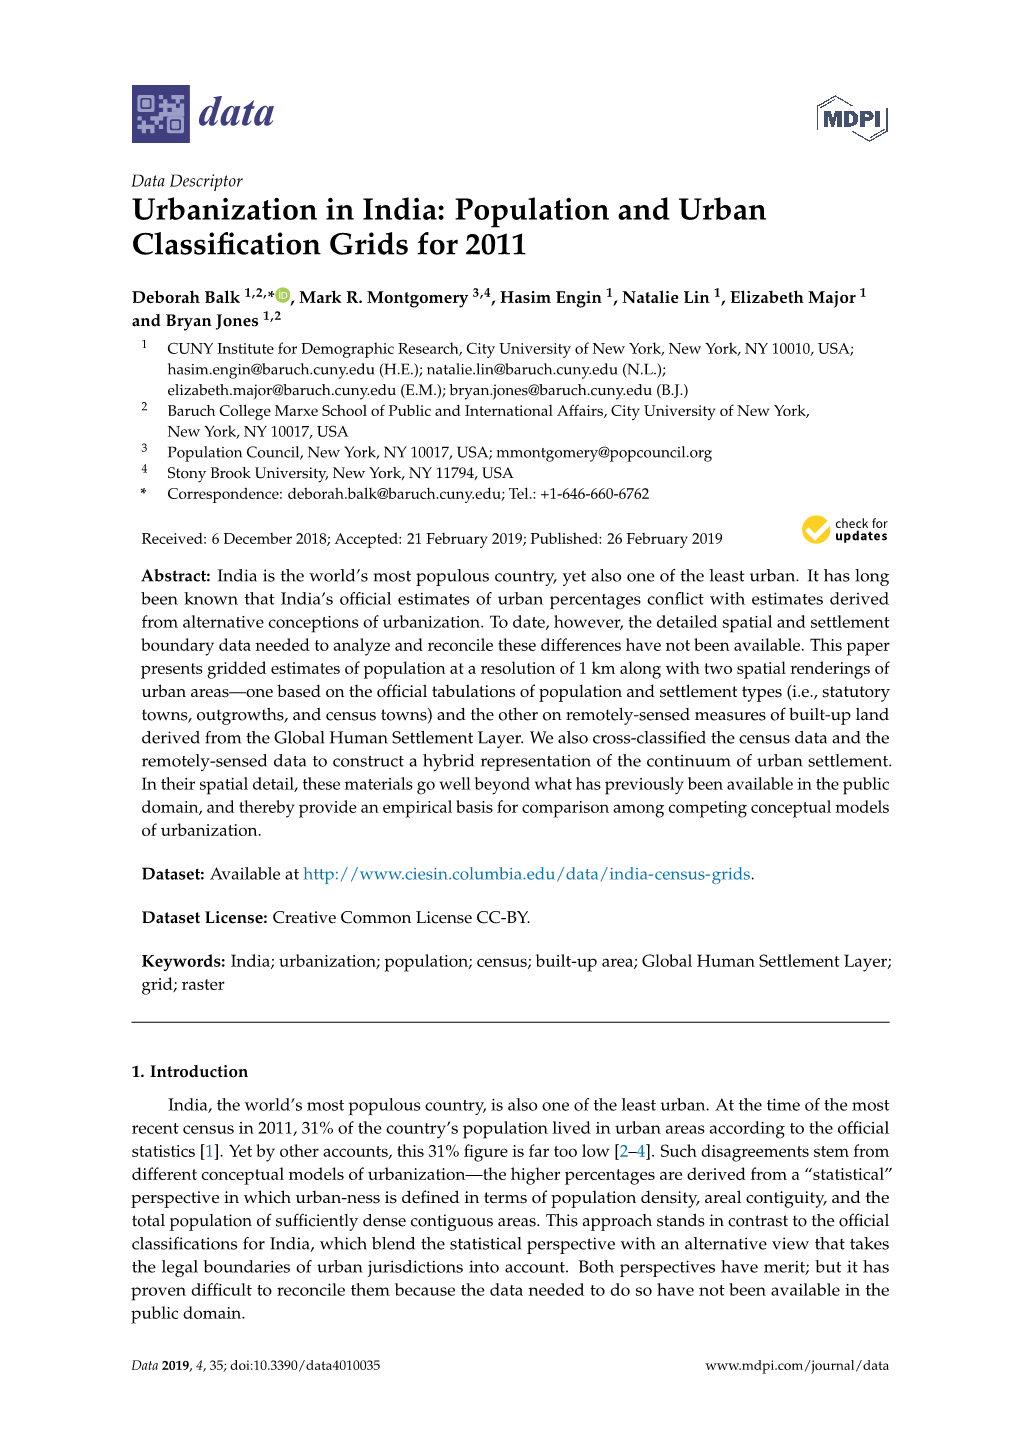 Urbanization in India: Population and Urban Classification Grids for 2011